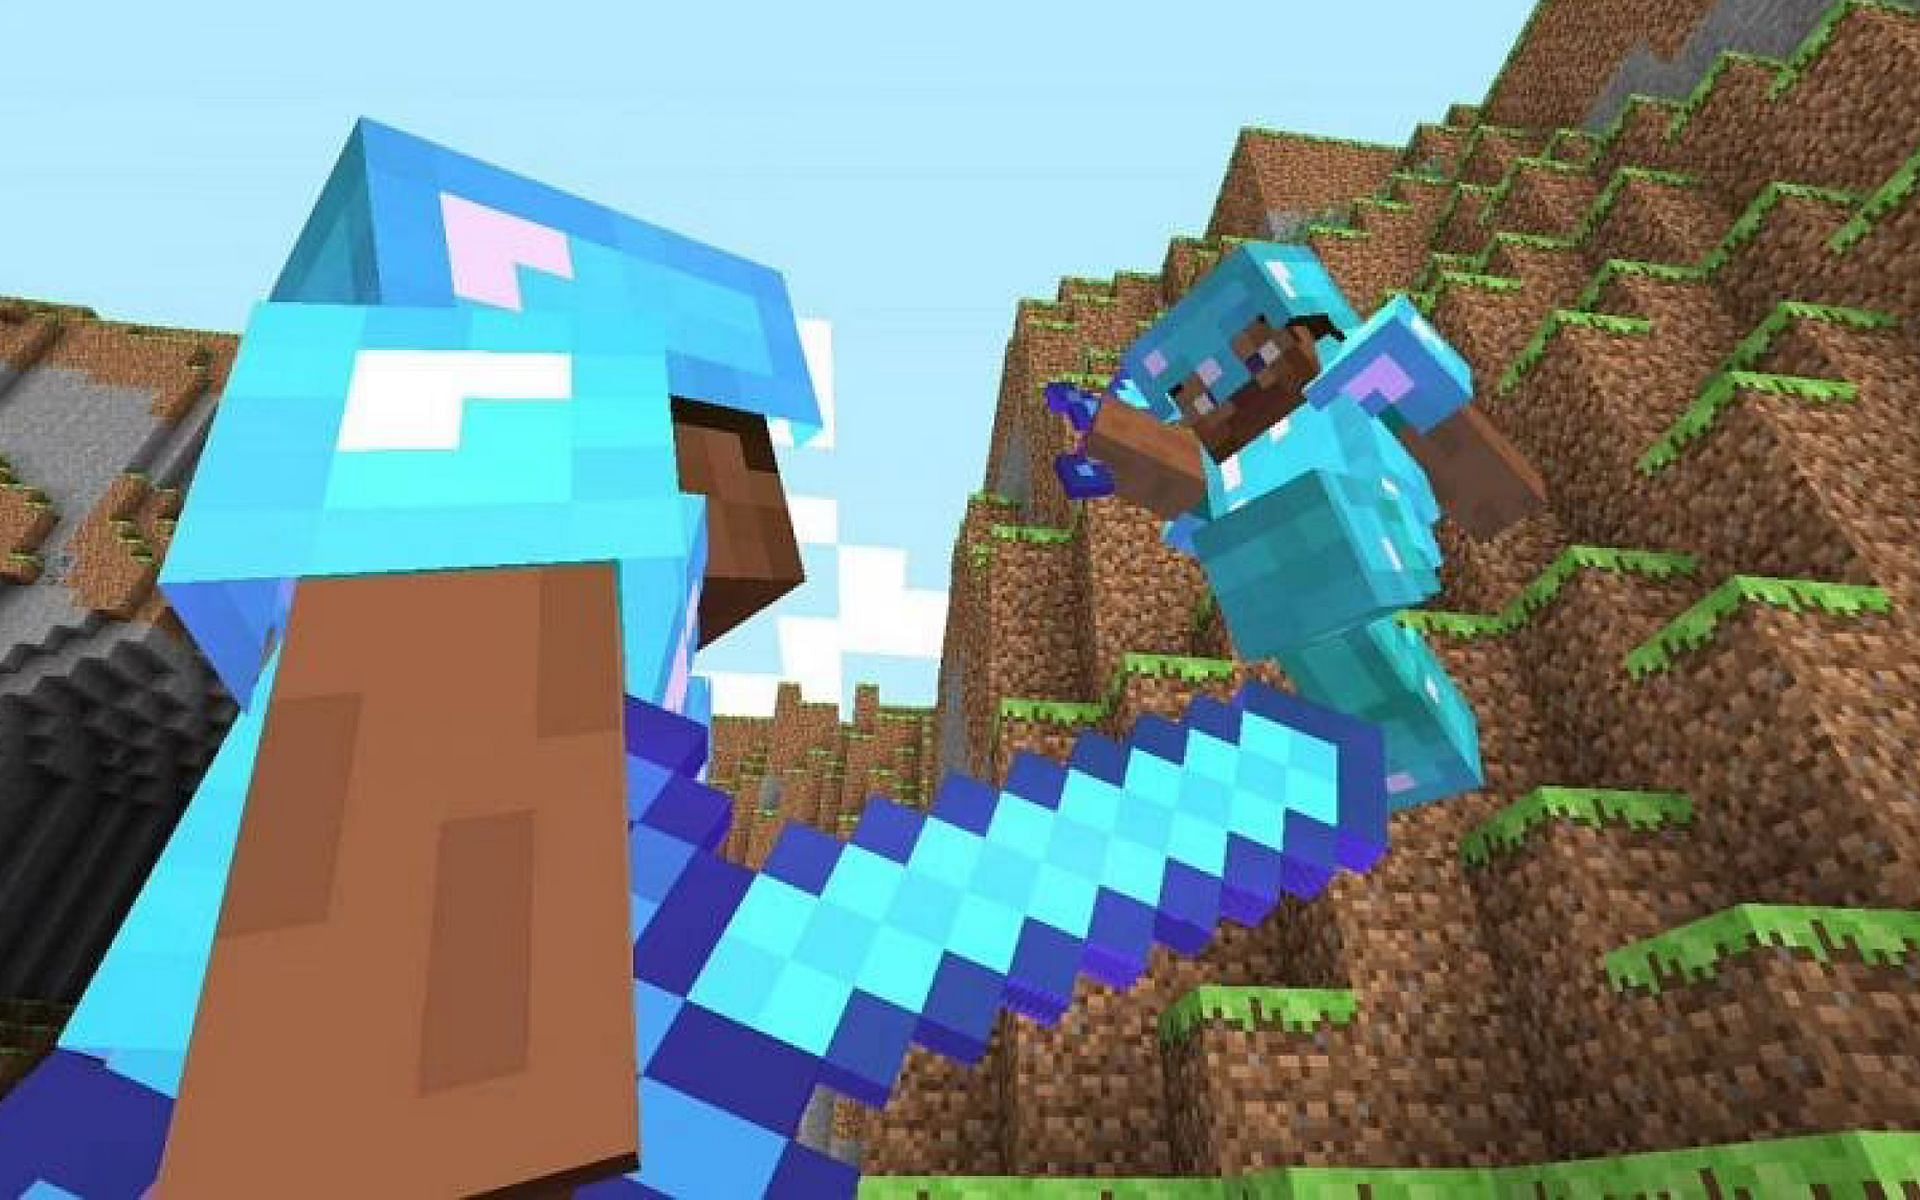 A rendering of PvP in-game. (Image via Mojang).